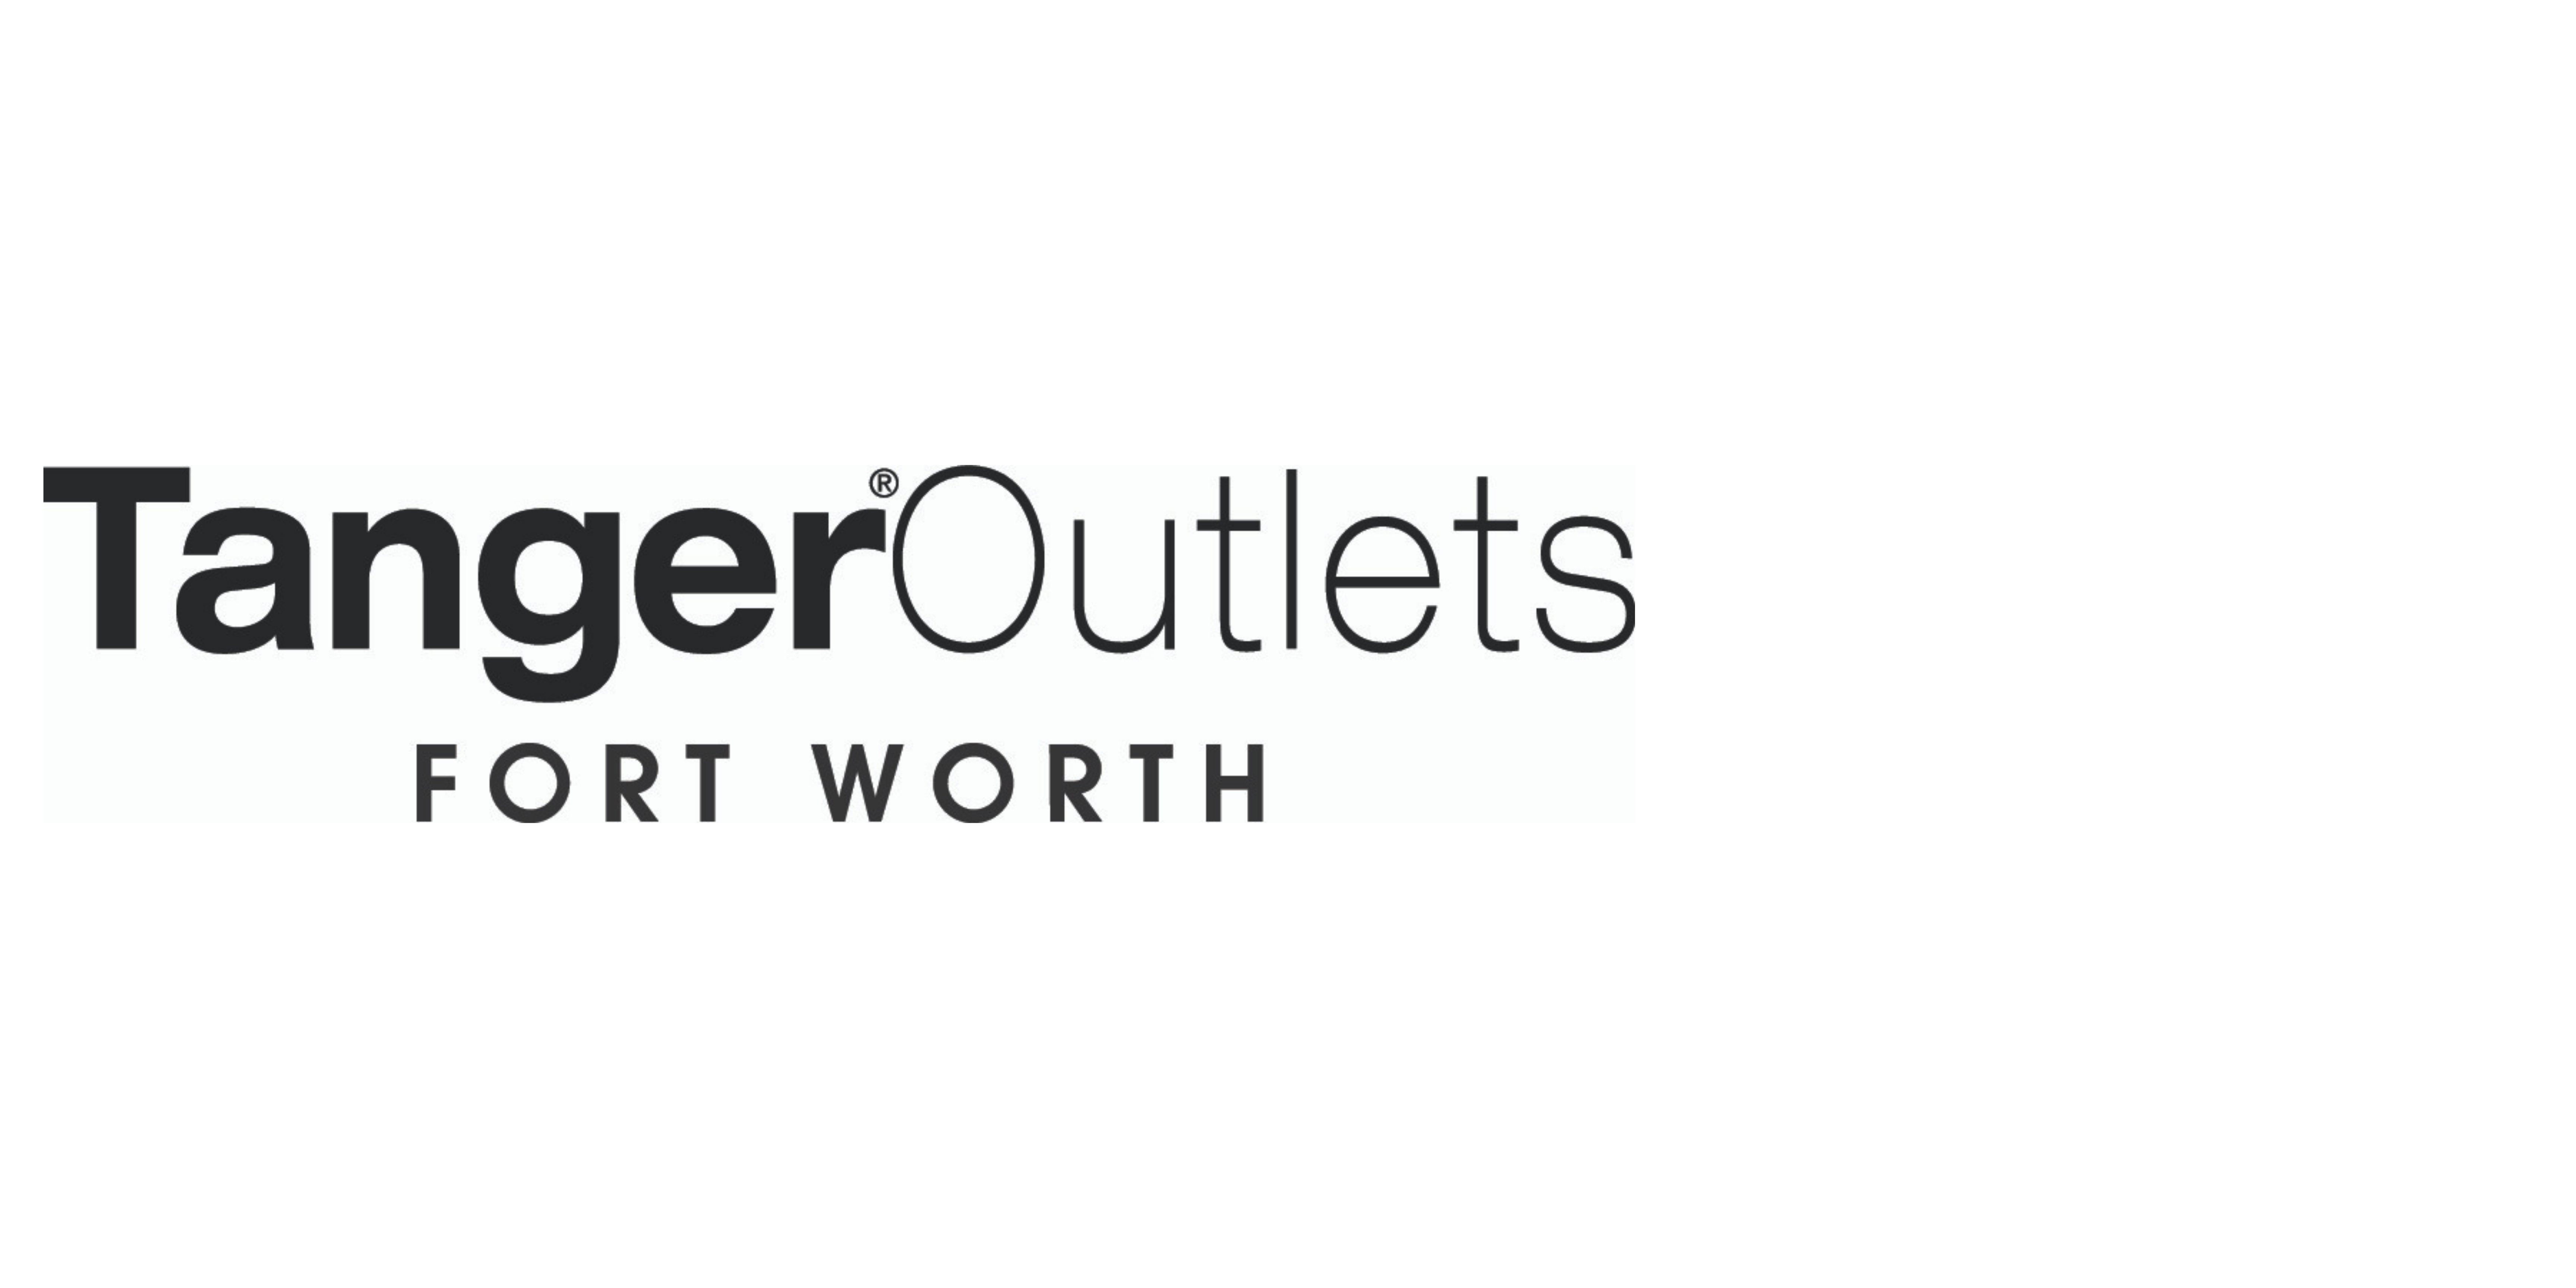 Tanger Outlets hosting free events for the kids over March Break - Bradford  News